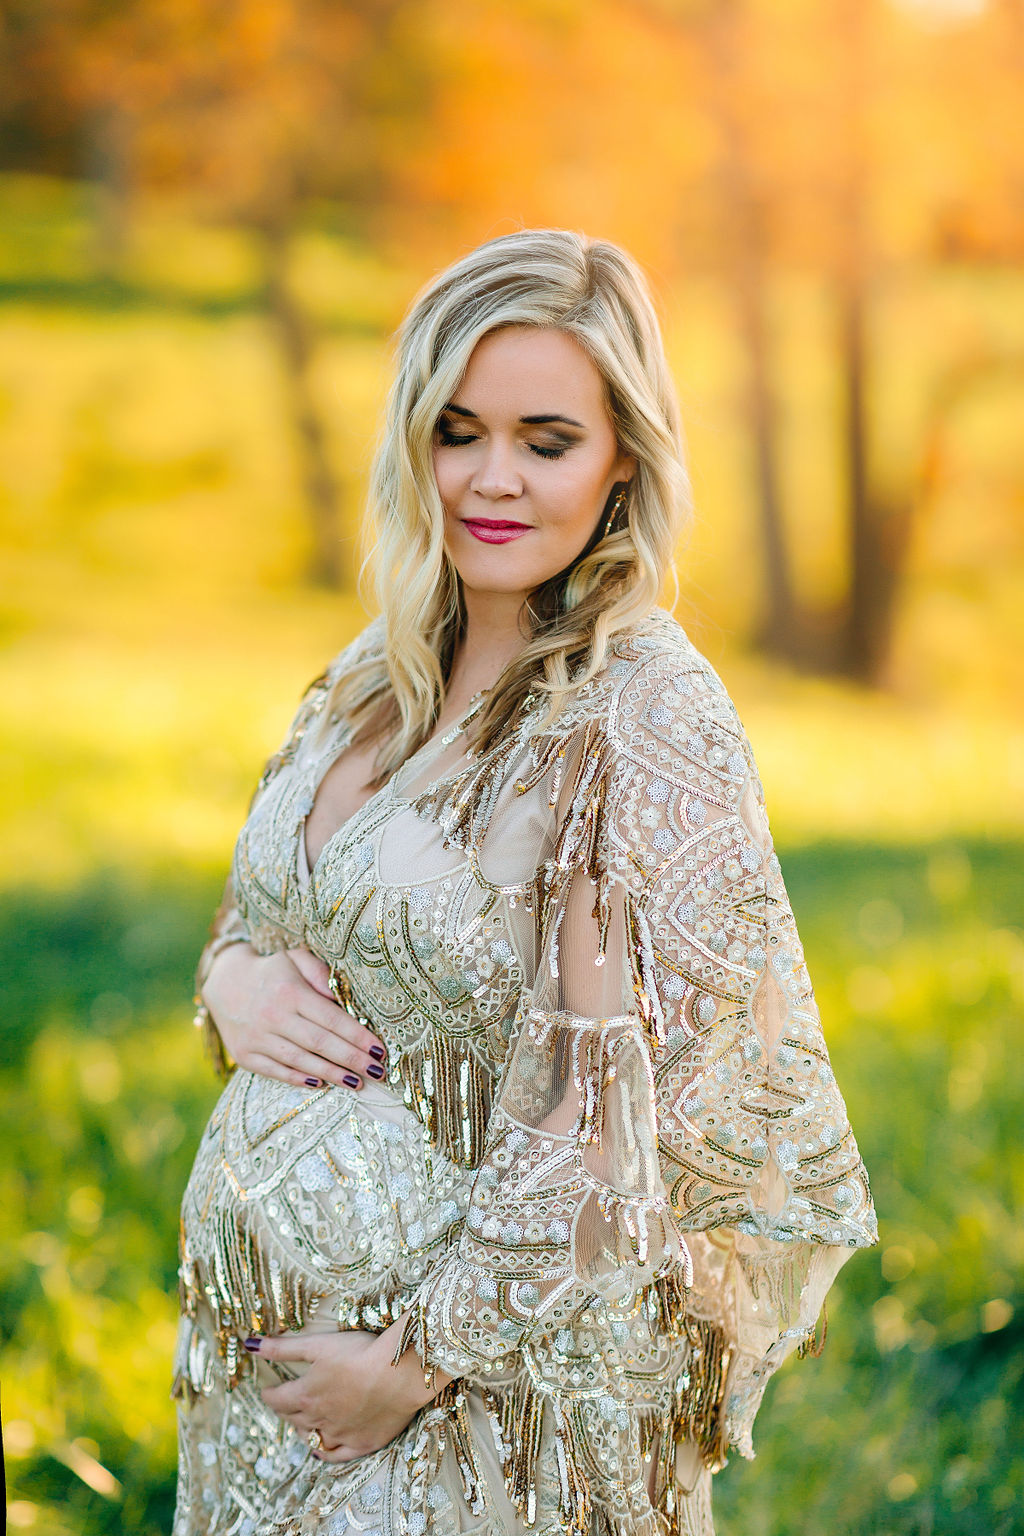 A mom-to-be wears an ornate maternity gown while standing in a green field with golden trees behind her obgyn winchester va